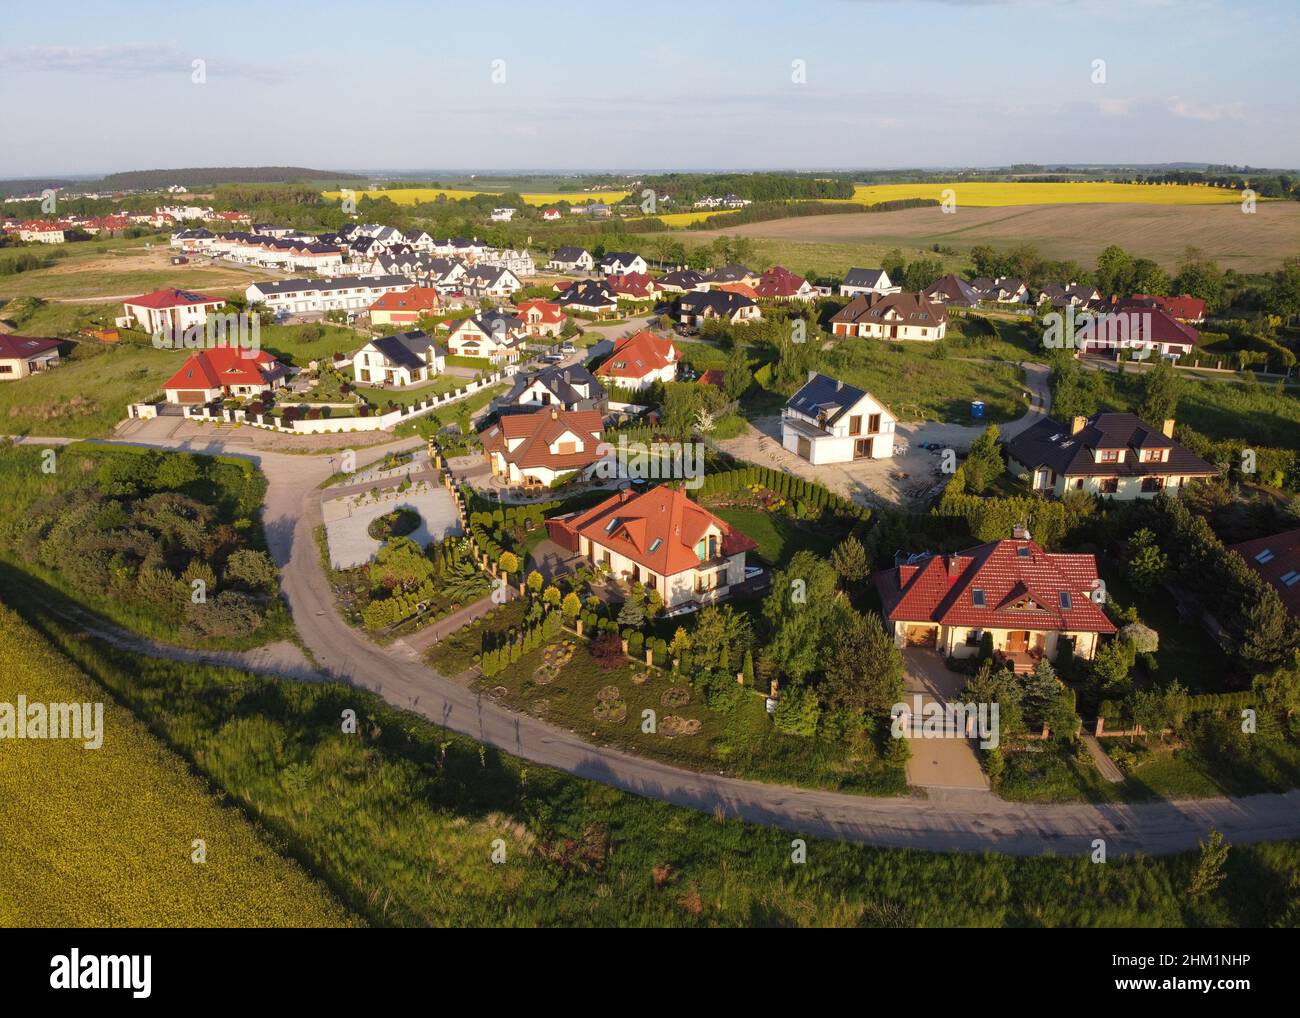 Residential neigborhood in sunset, bird eye view. Suburbs or village streets with luxury house buildings Stock Photo